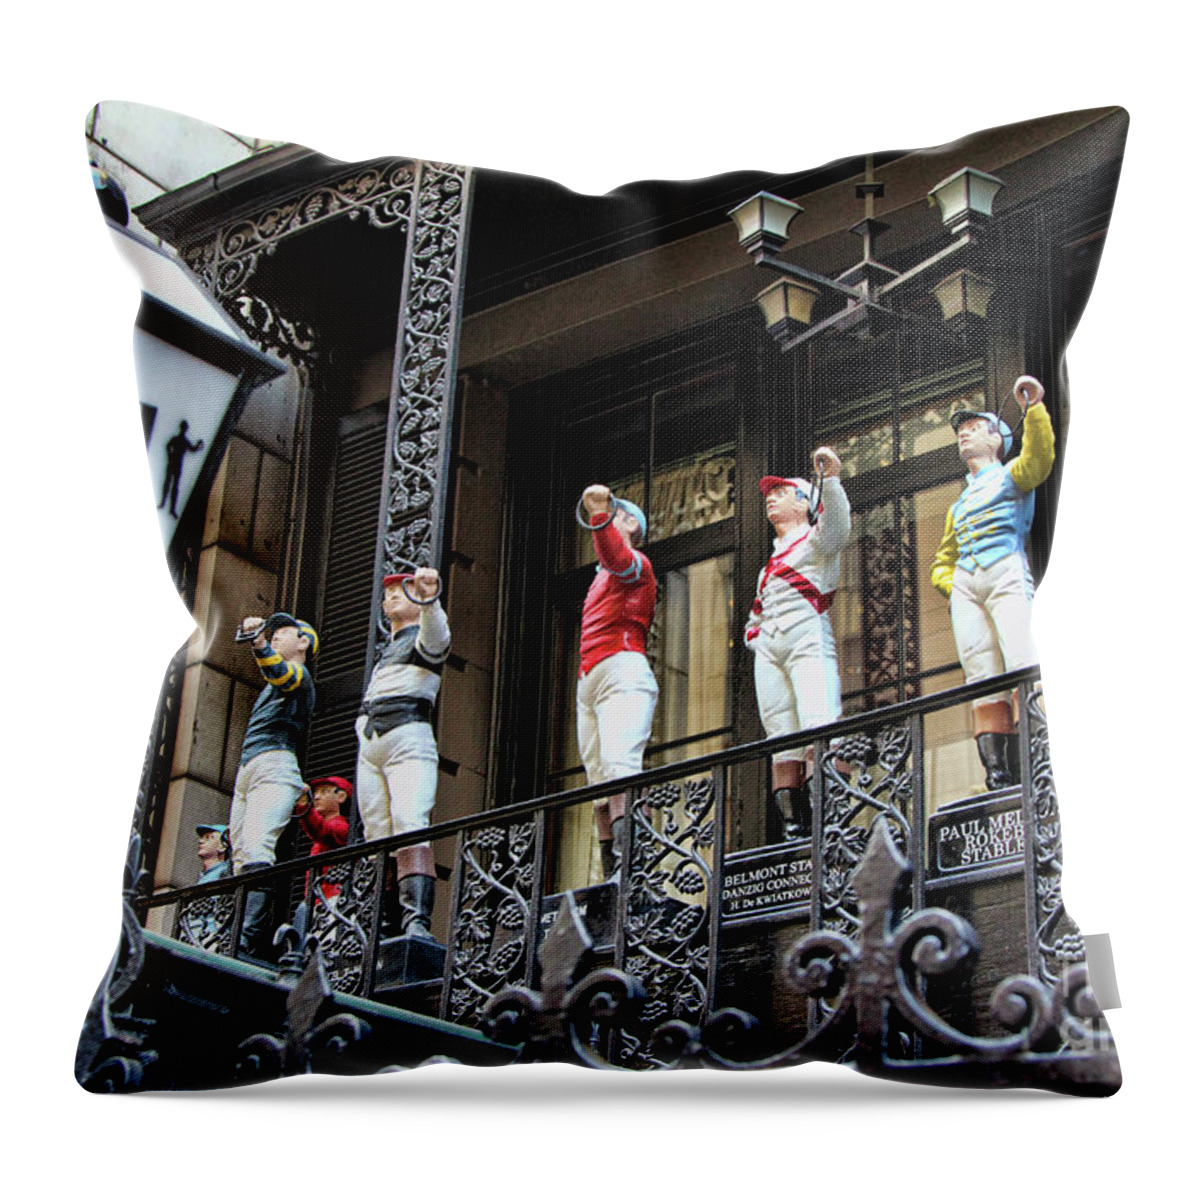 Nyc Throw Pillow featuring the photograph Jockey Club 21 NYC by Chuck Kuhn